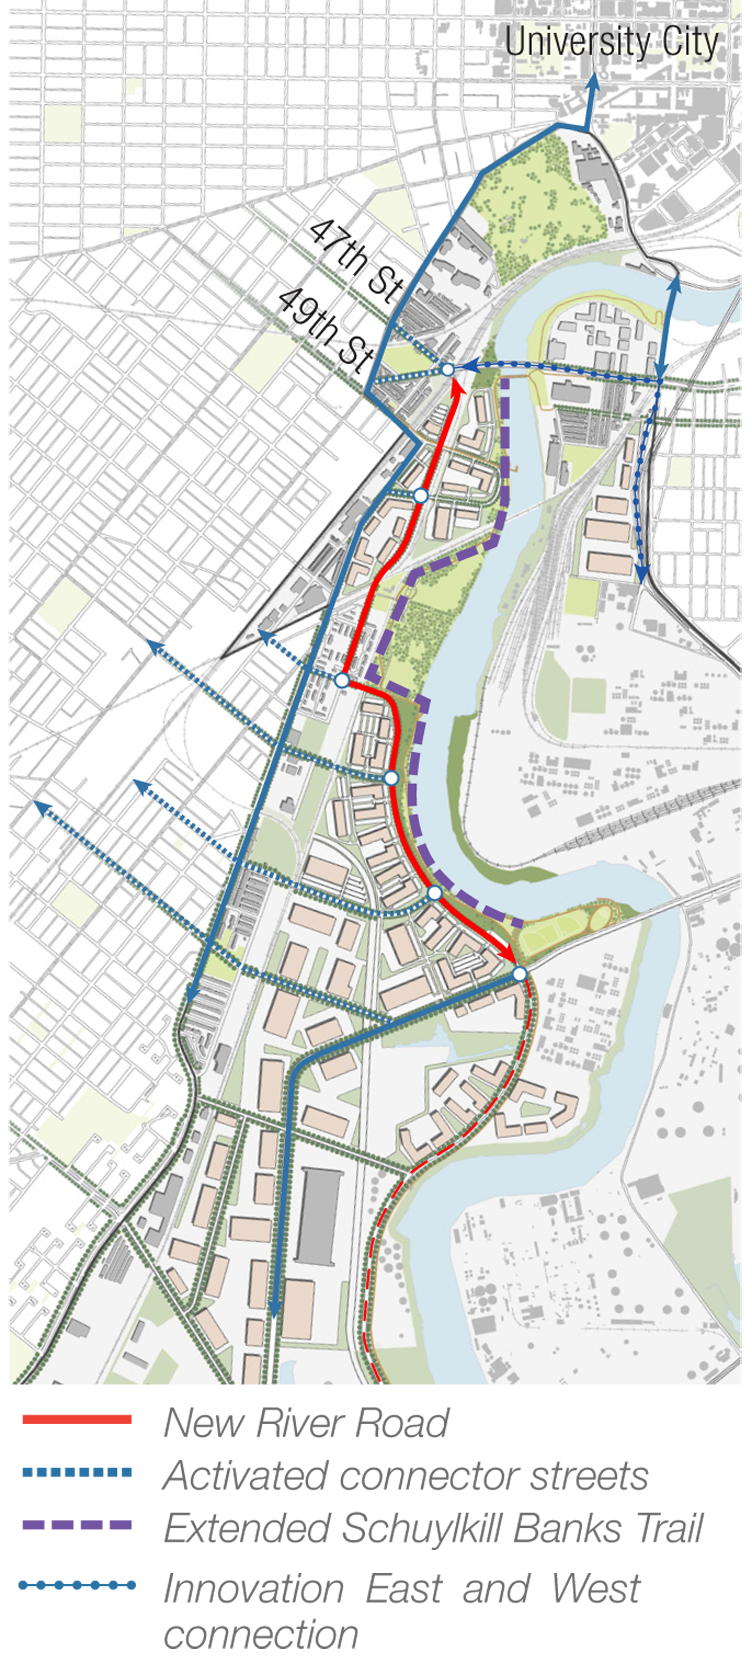 The Lower Schuylkill Master Plan calls for a new river road to improve access and circulation. See the red line above for its possible alignment. | Graphic from Lower Schuylkill Master Plan 